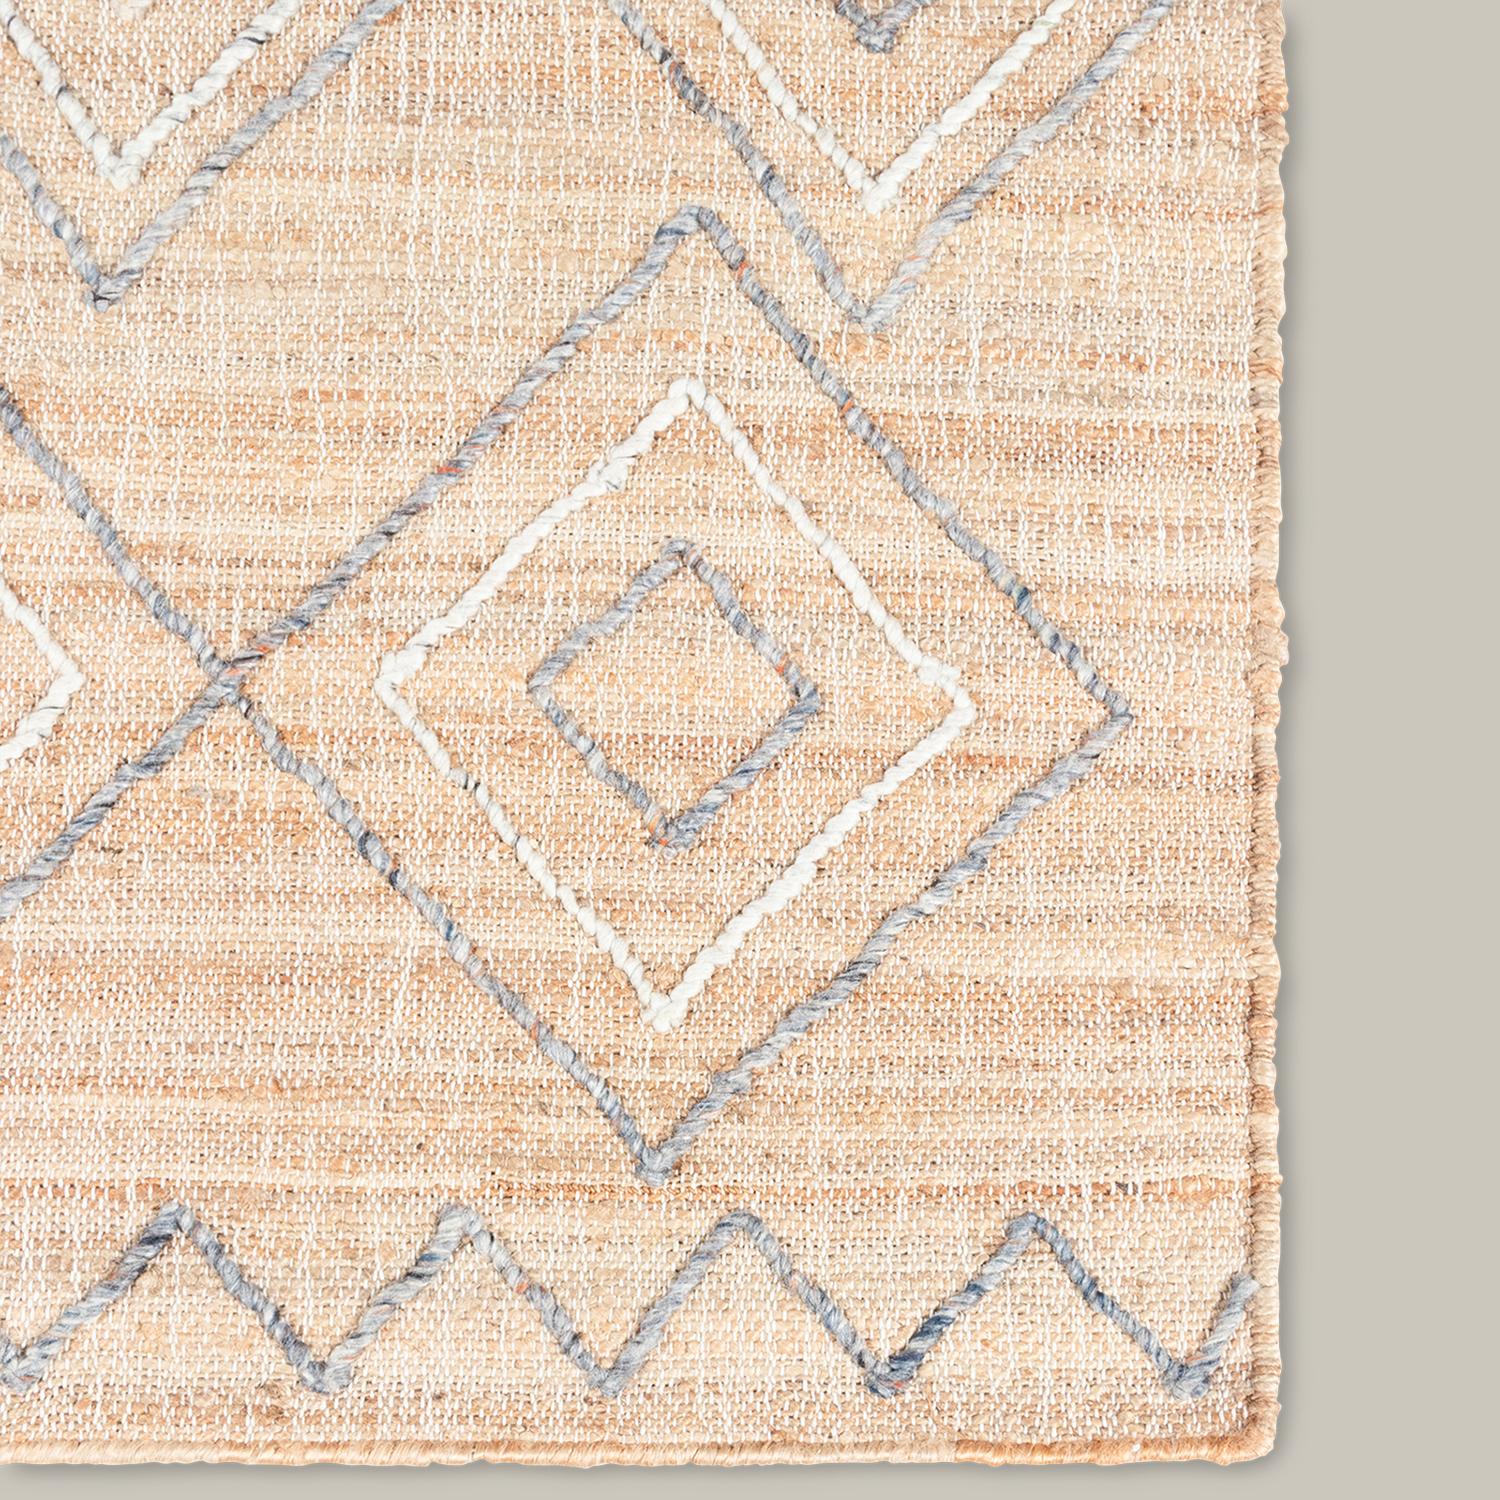 Hand-Woven “Argan Oshipi” African Mud Cloth-Inspired Rug by Christiane Lemieux For Sale